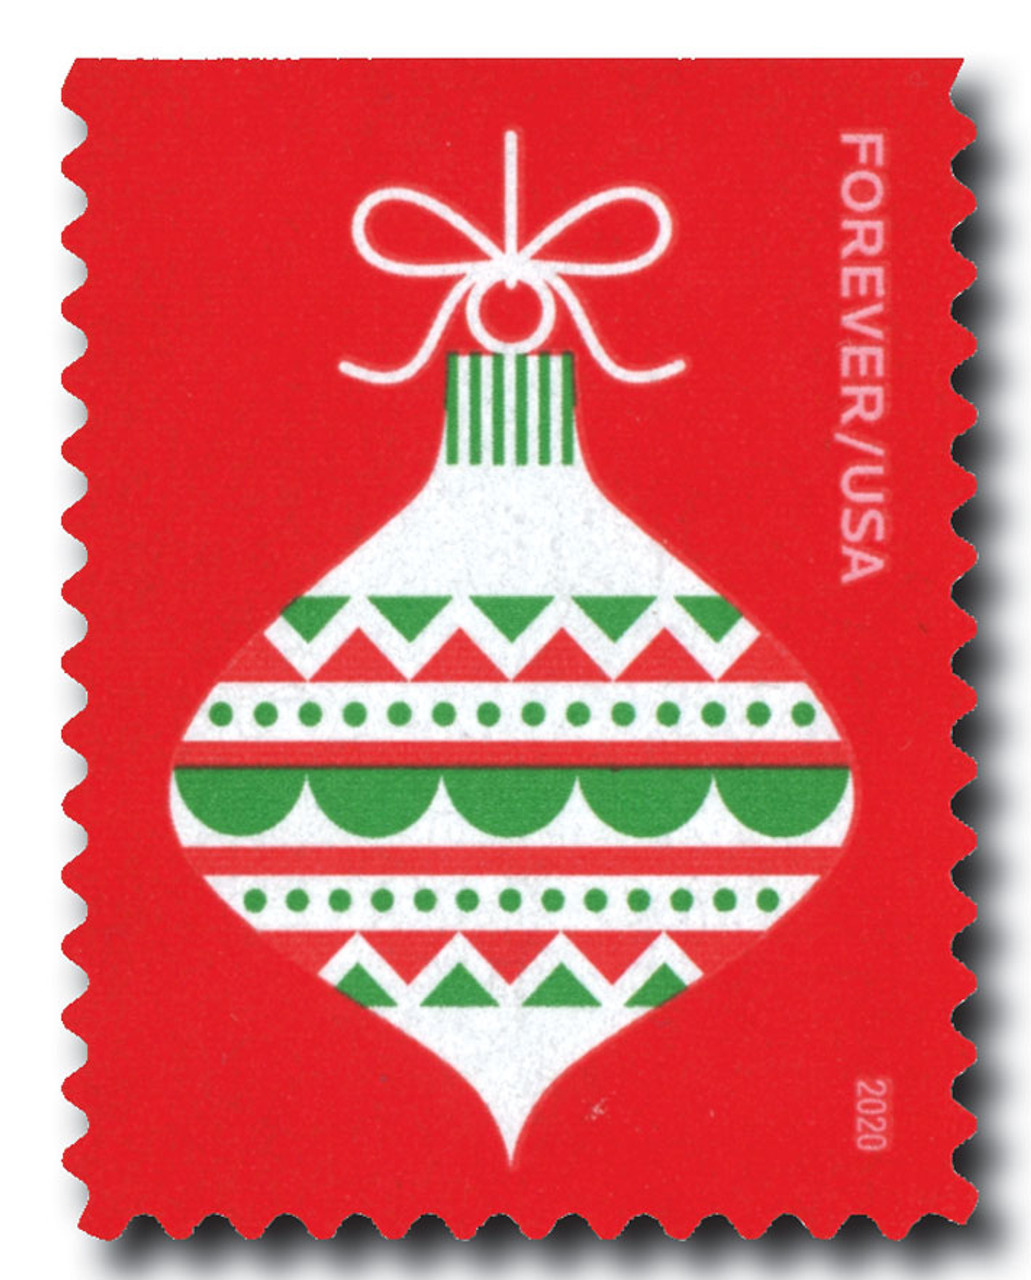 5334 - 2018 First-Class Forever Stamp - Contemporary Christmas: Sparkling  Holidays, Santa Claus and Book, Reading - Mystic Stamp Company